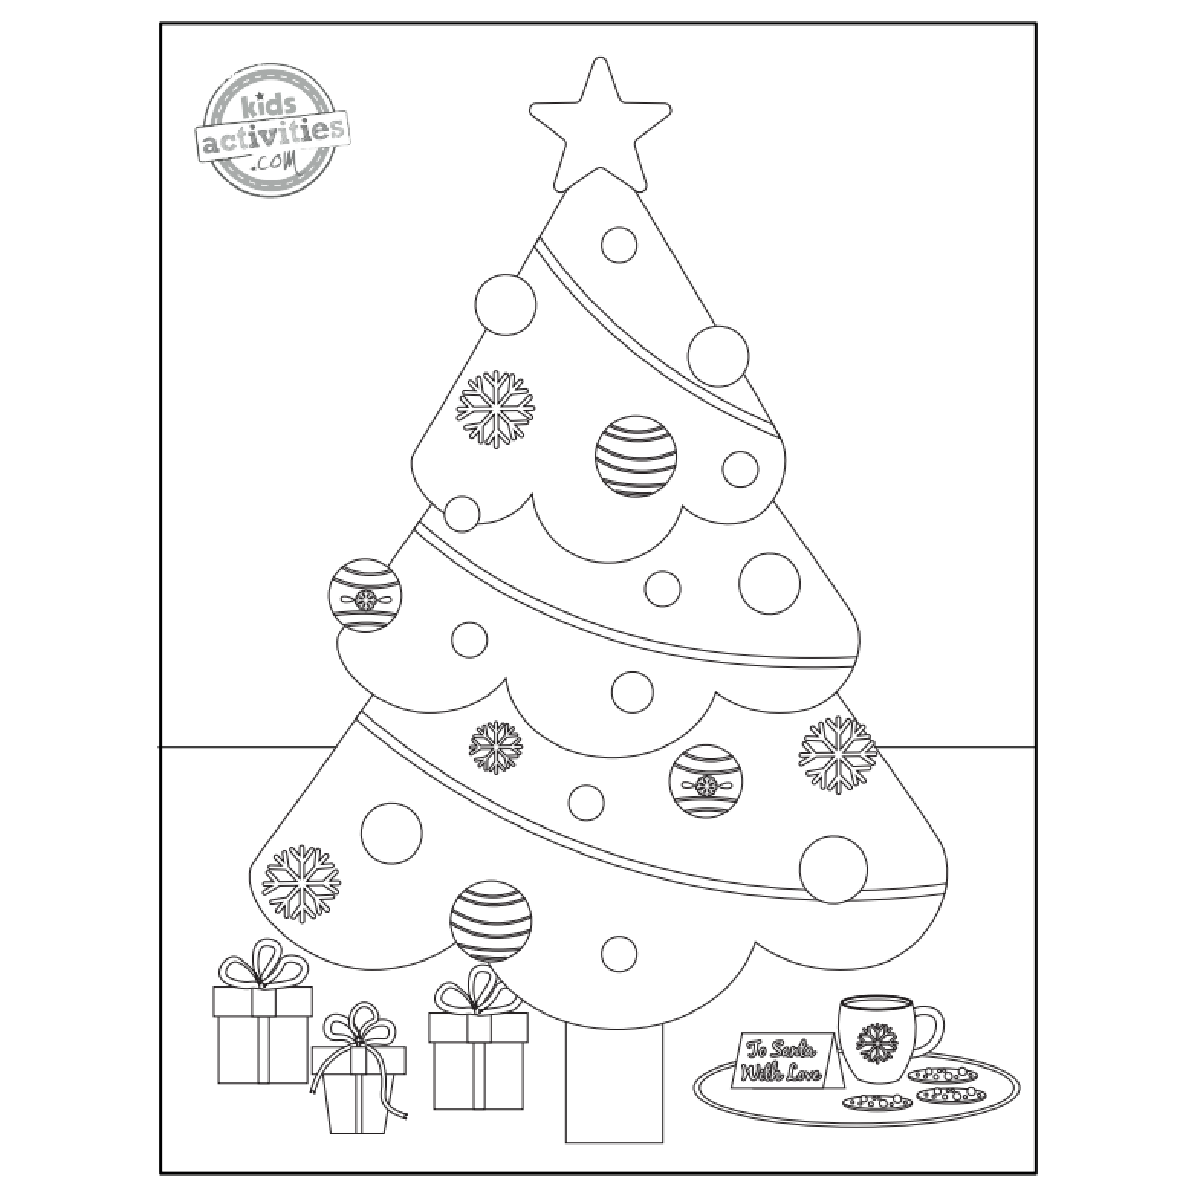 Cheery christmas tree coloring page perfect for the holiday season kids activities blog